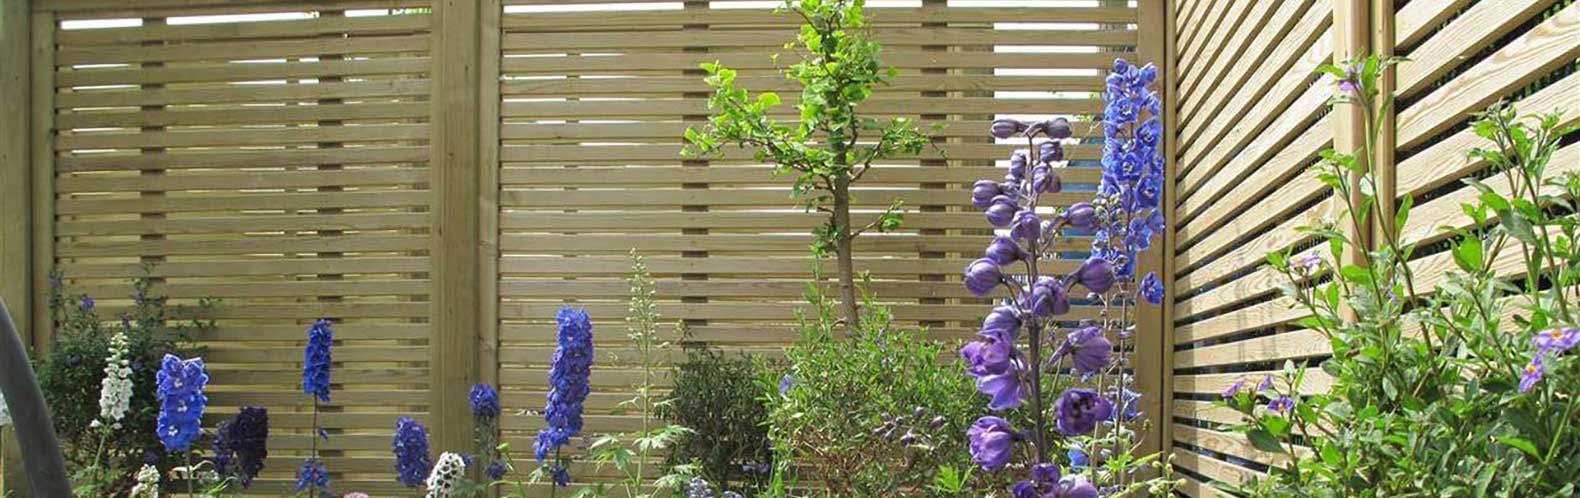 Quick Fix Projects for Your Garden